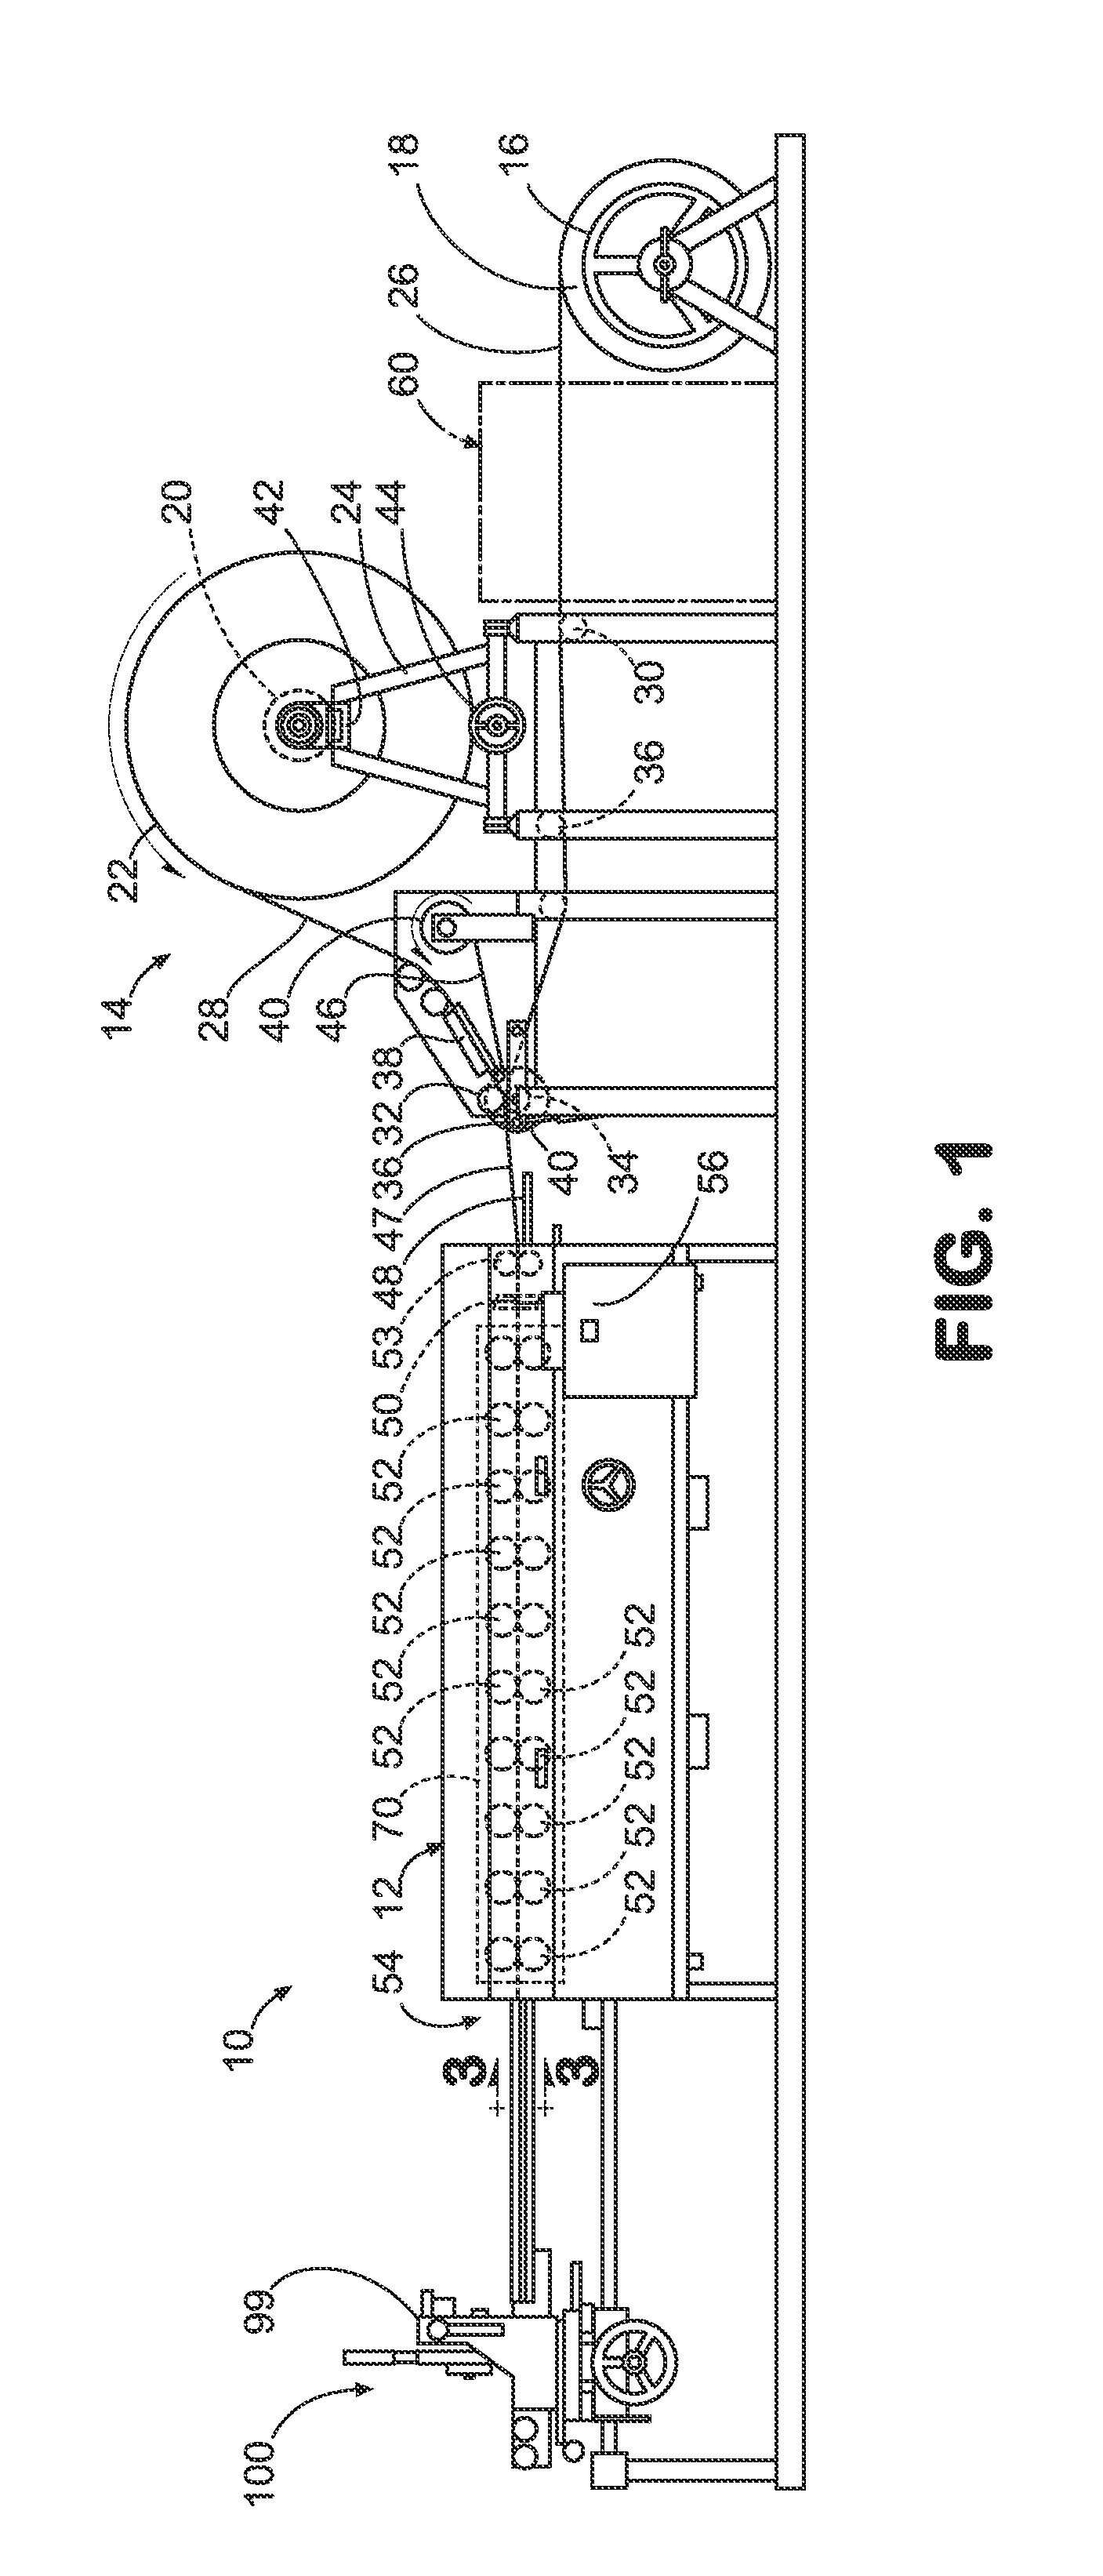 Probrammable Rollfromer for Combining an Architectural Sheet with a Solar Panel and Method